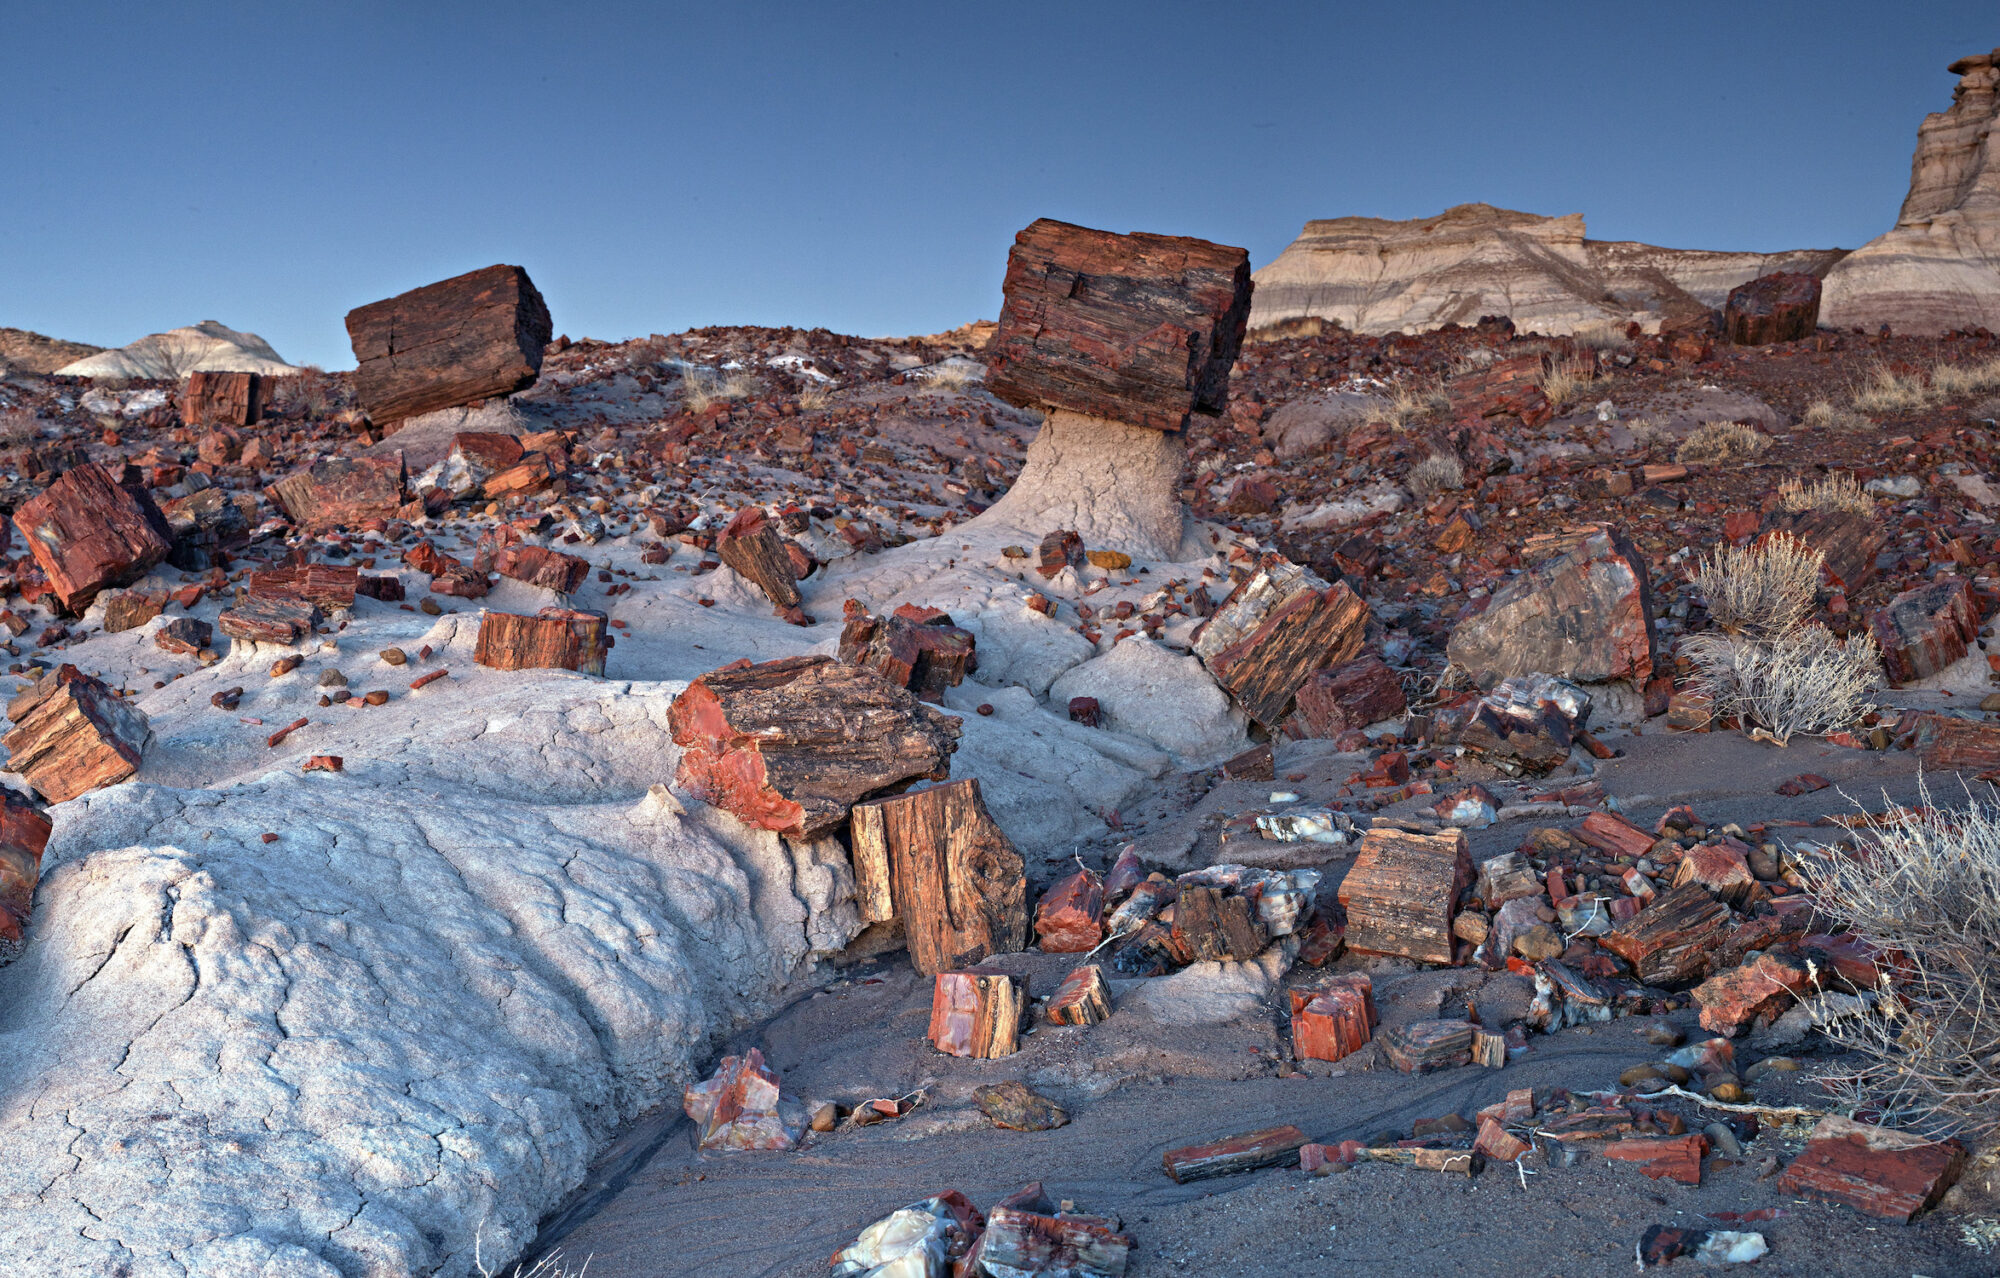 Red petrified wood scattered across the landscape at Petrified Forest National Park